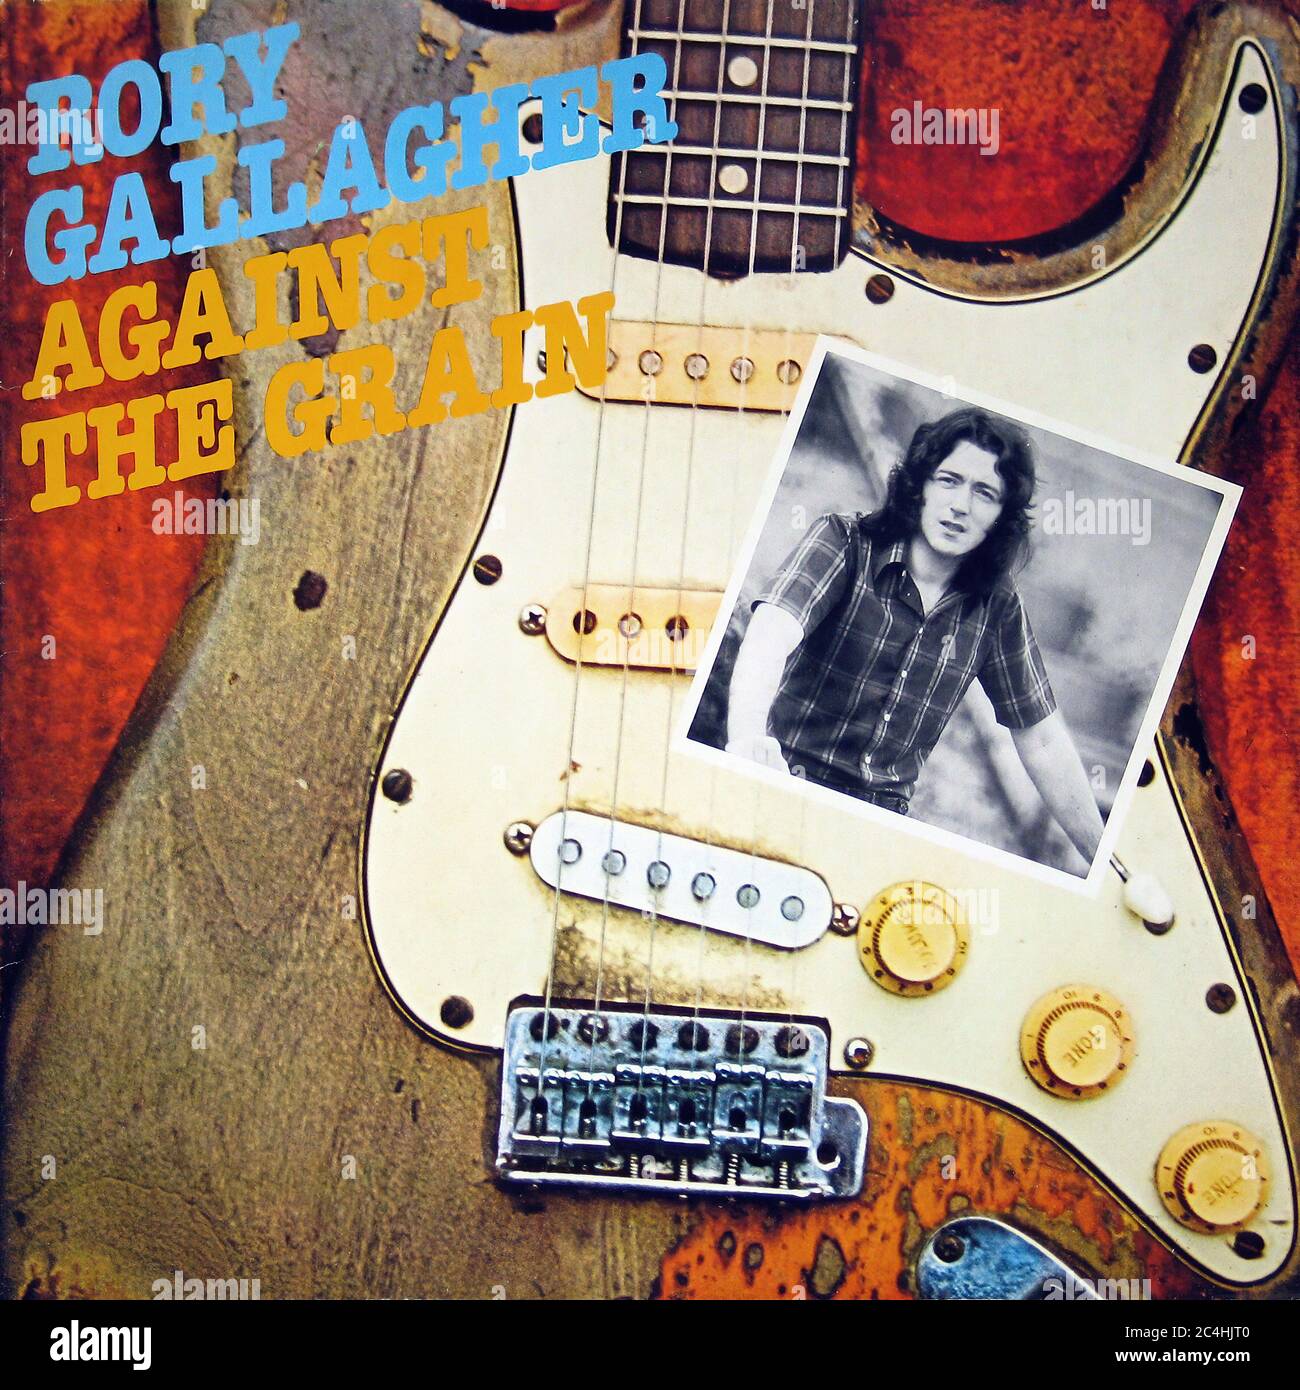 Rory Gallagher Against the Grain 12'' Vinyl Lp - Vintage Record Cover Stock Photo